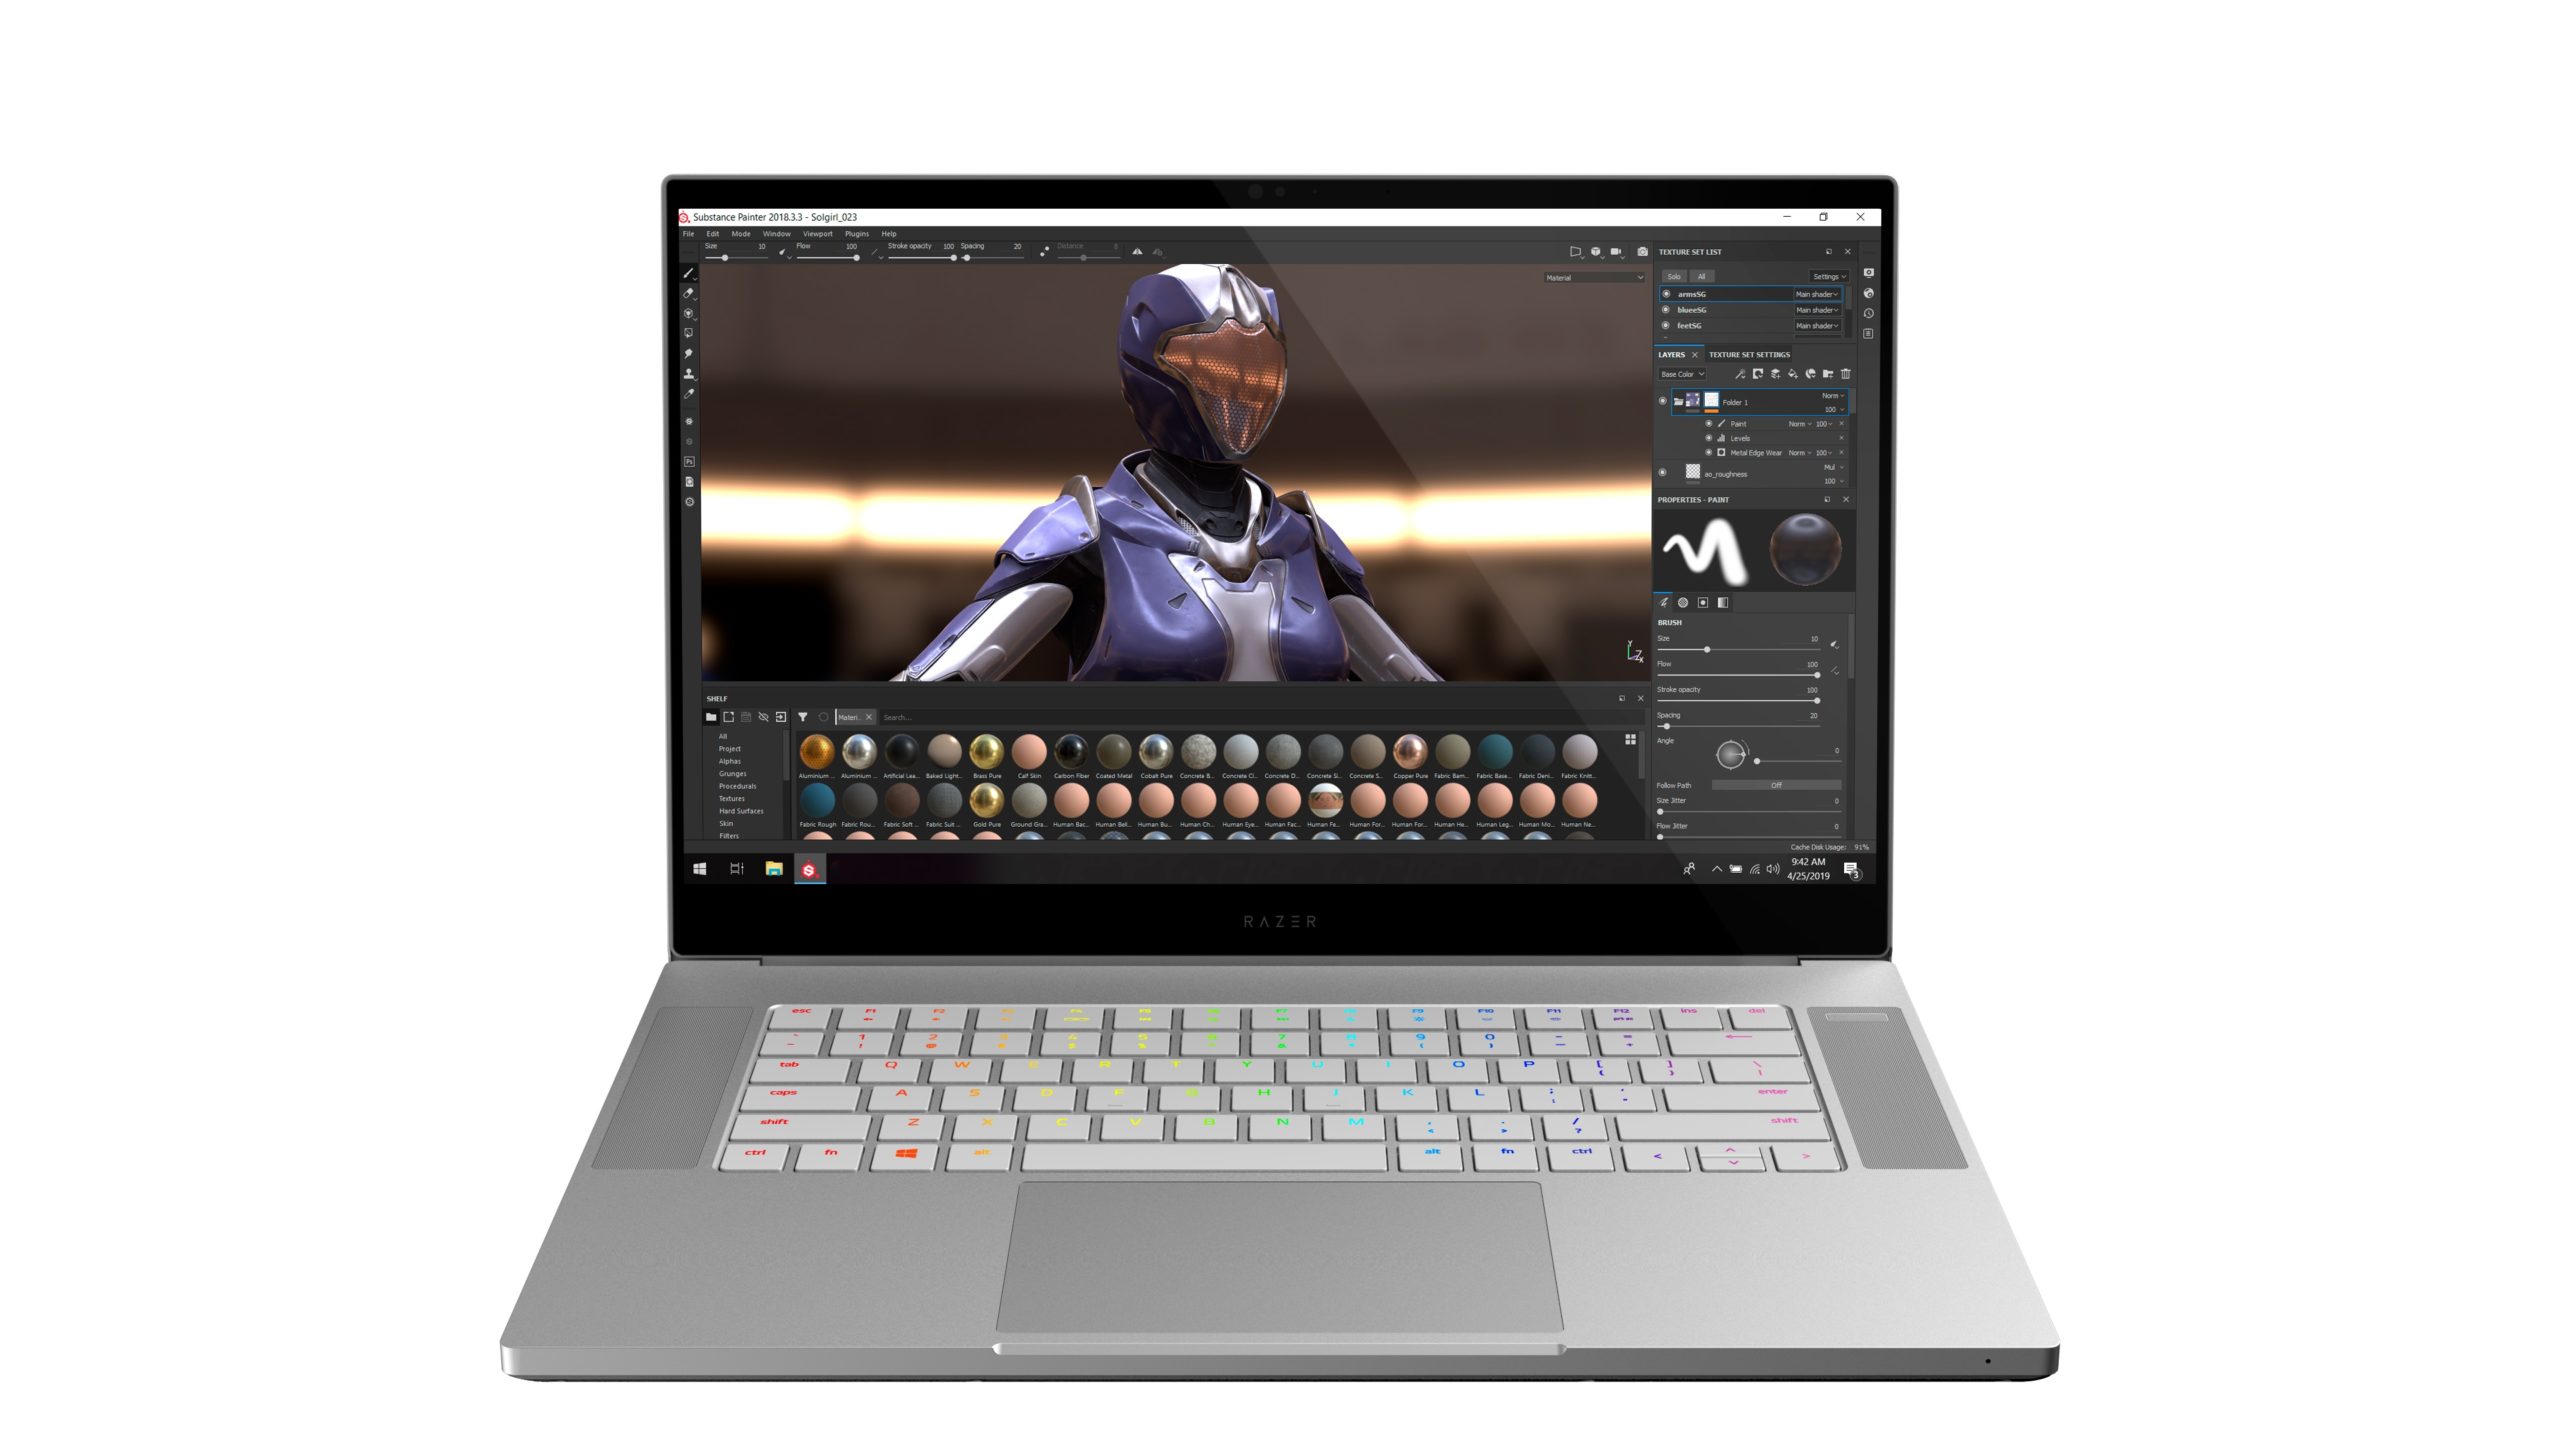 Razer Blade 15 Studio Edition, open and facing viewer with a robot on screen